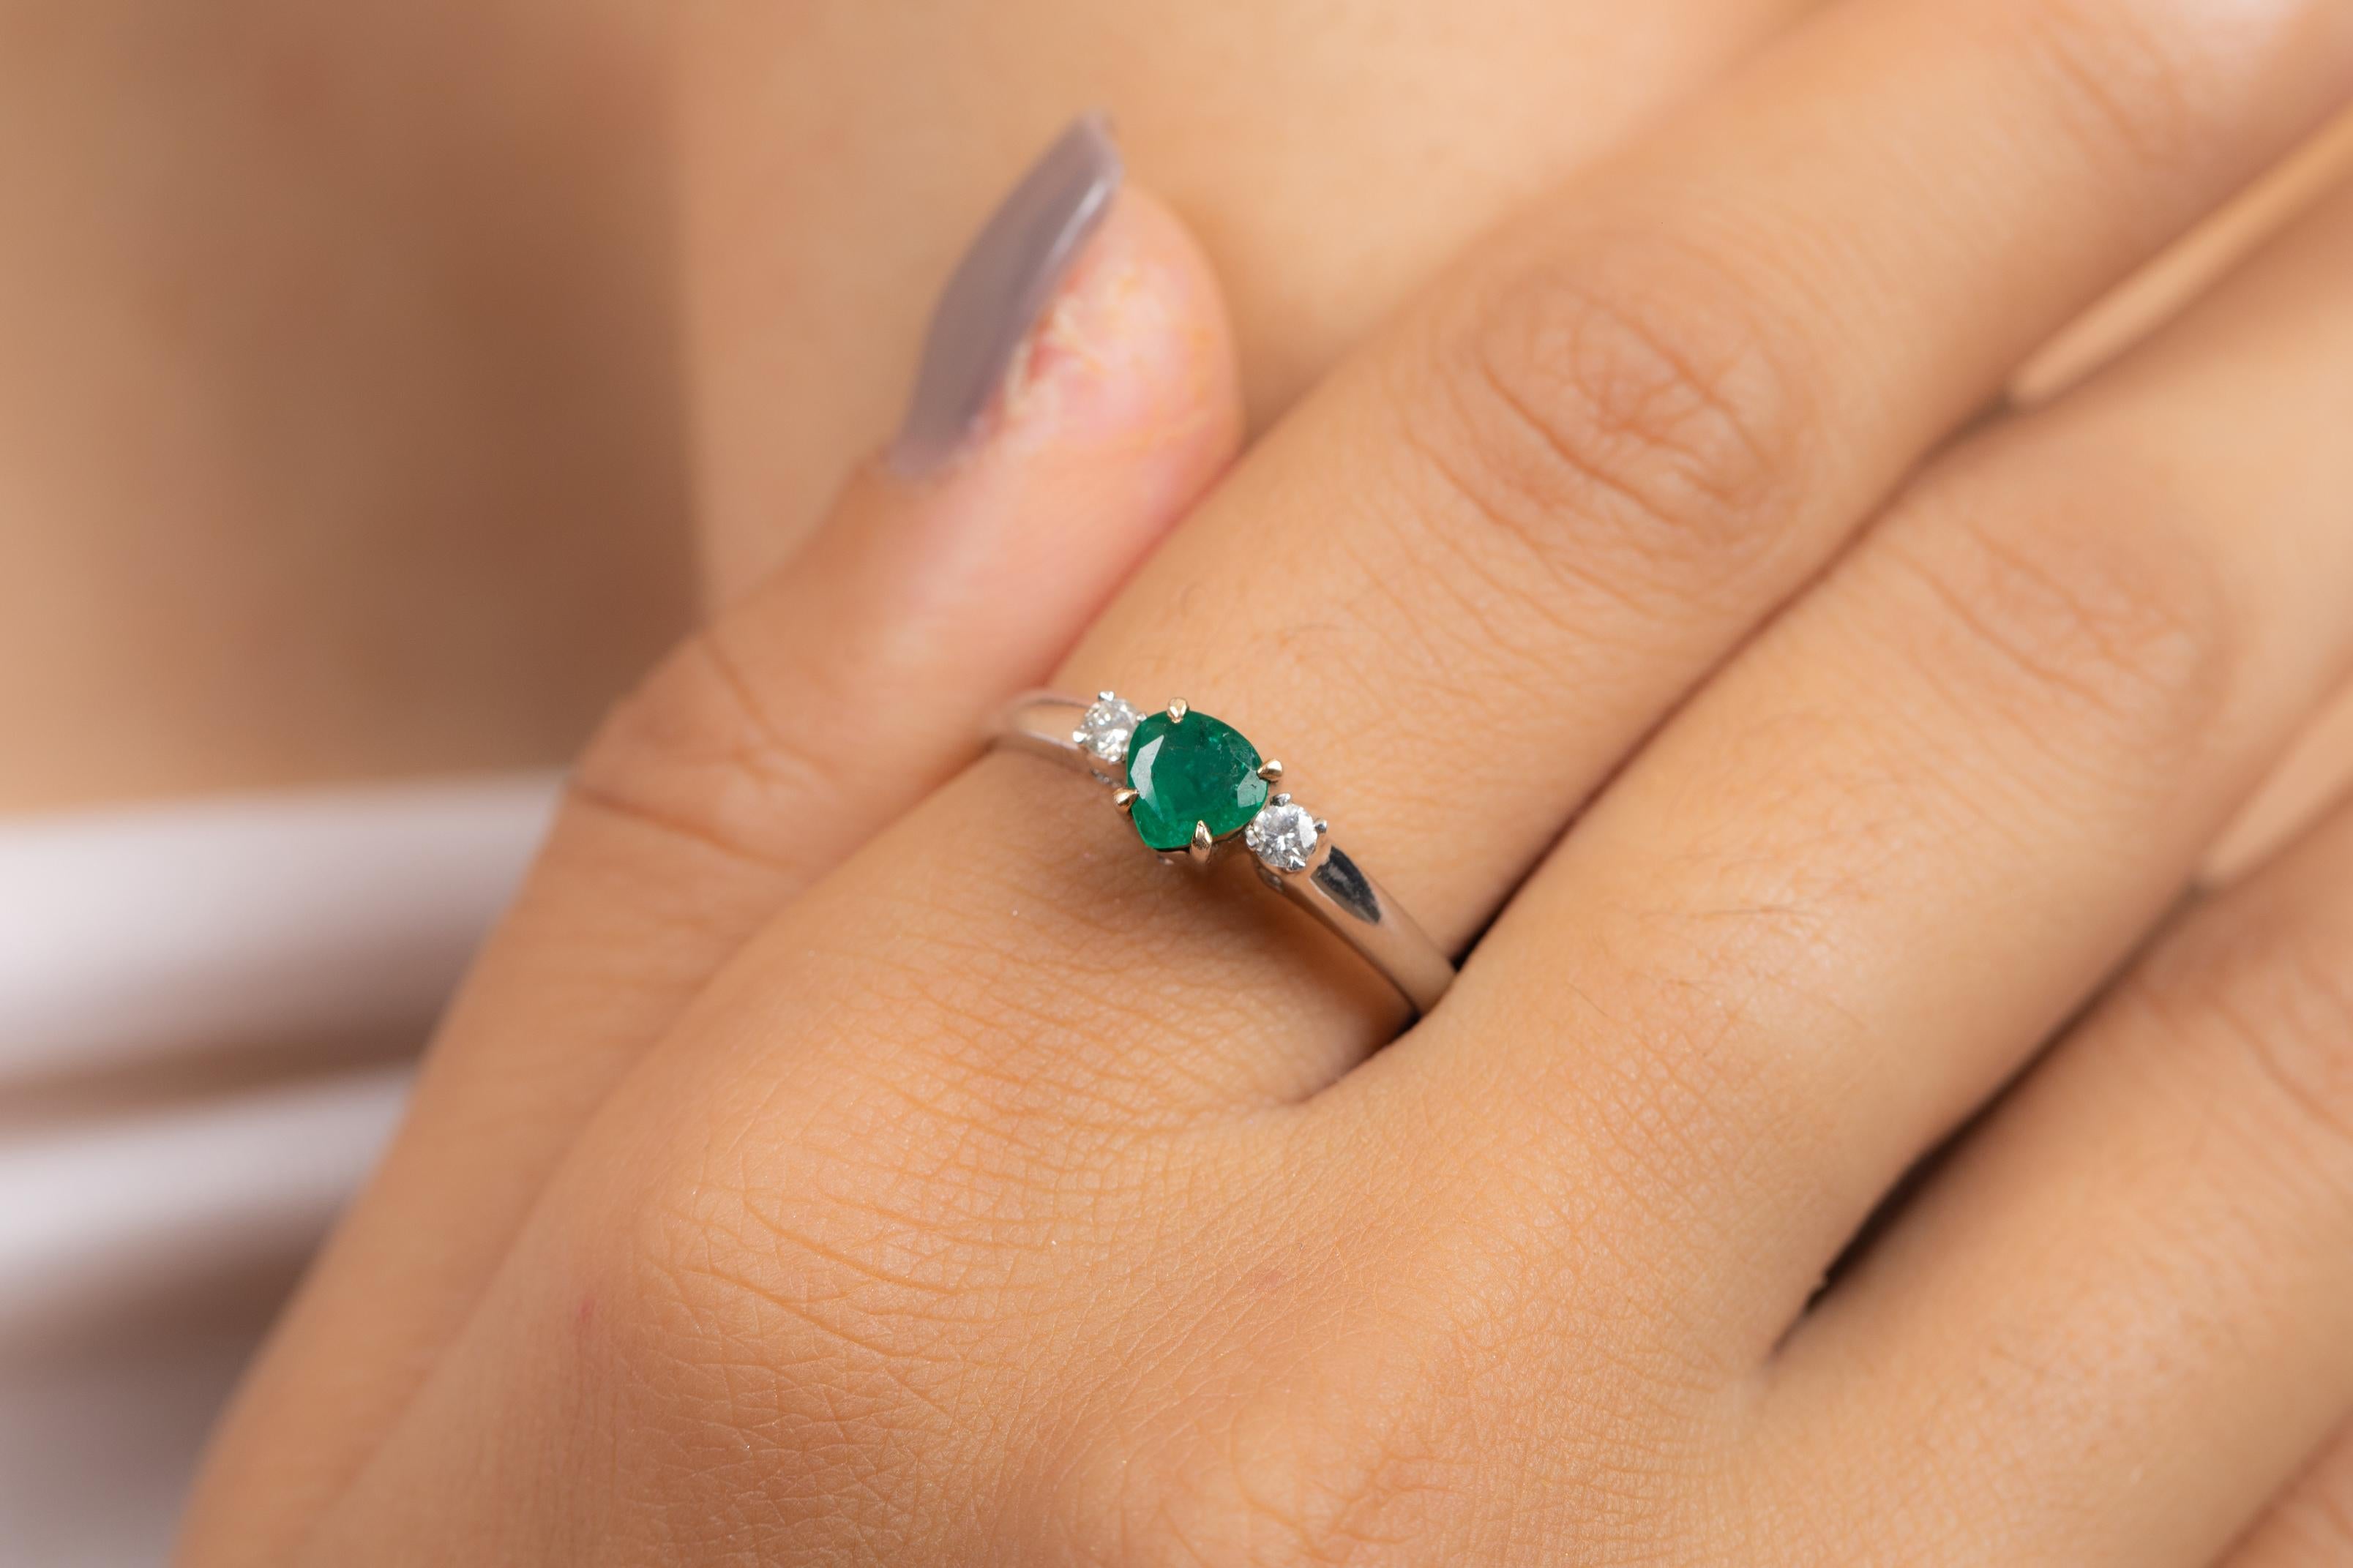 Natural Emerald Diamond Three Stone Ring in 18K Gold featuring natural emerald of 0.48 carats and diamonds of 0.08 carats. The gorgeous handcrafted ring goes with every style.
Emerald gemstone enhances the intellectual capacity of the